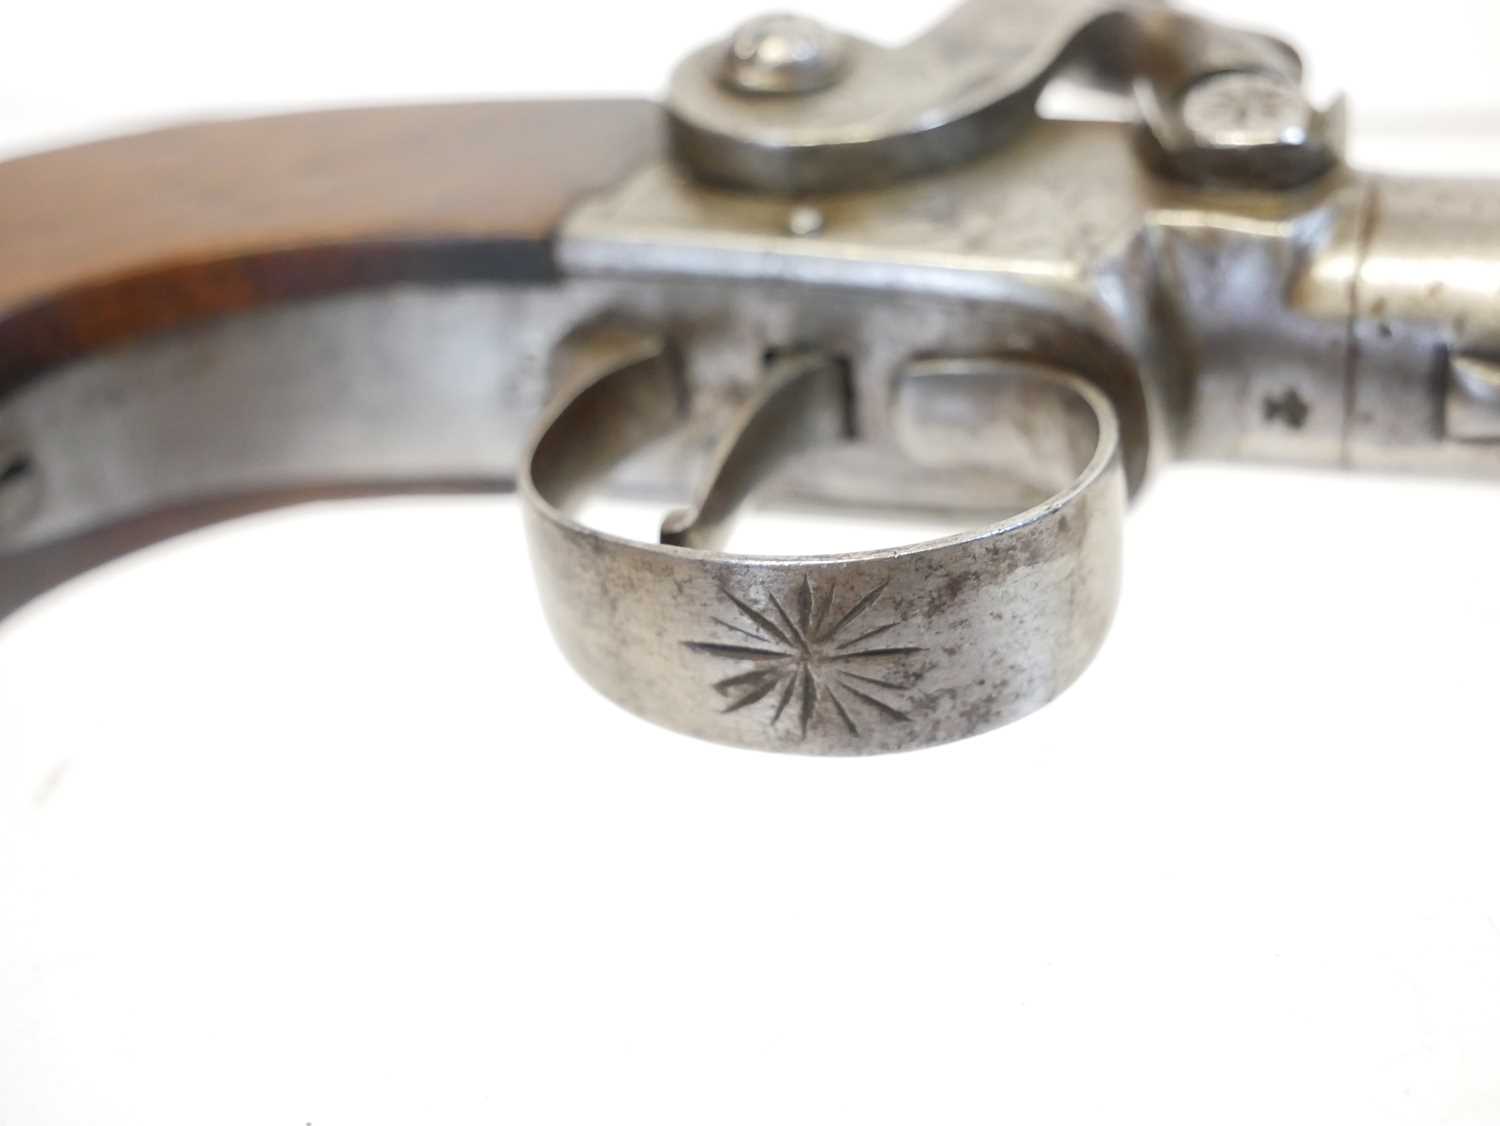 Hetherington of Nottingham 48 bore percussion pistol, with 2.5 inch barrel ,boxlock action - Image 3 of 9